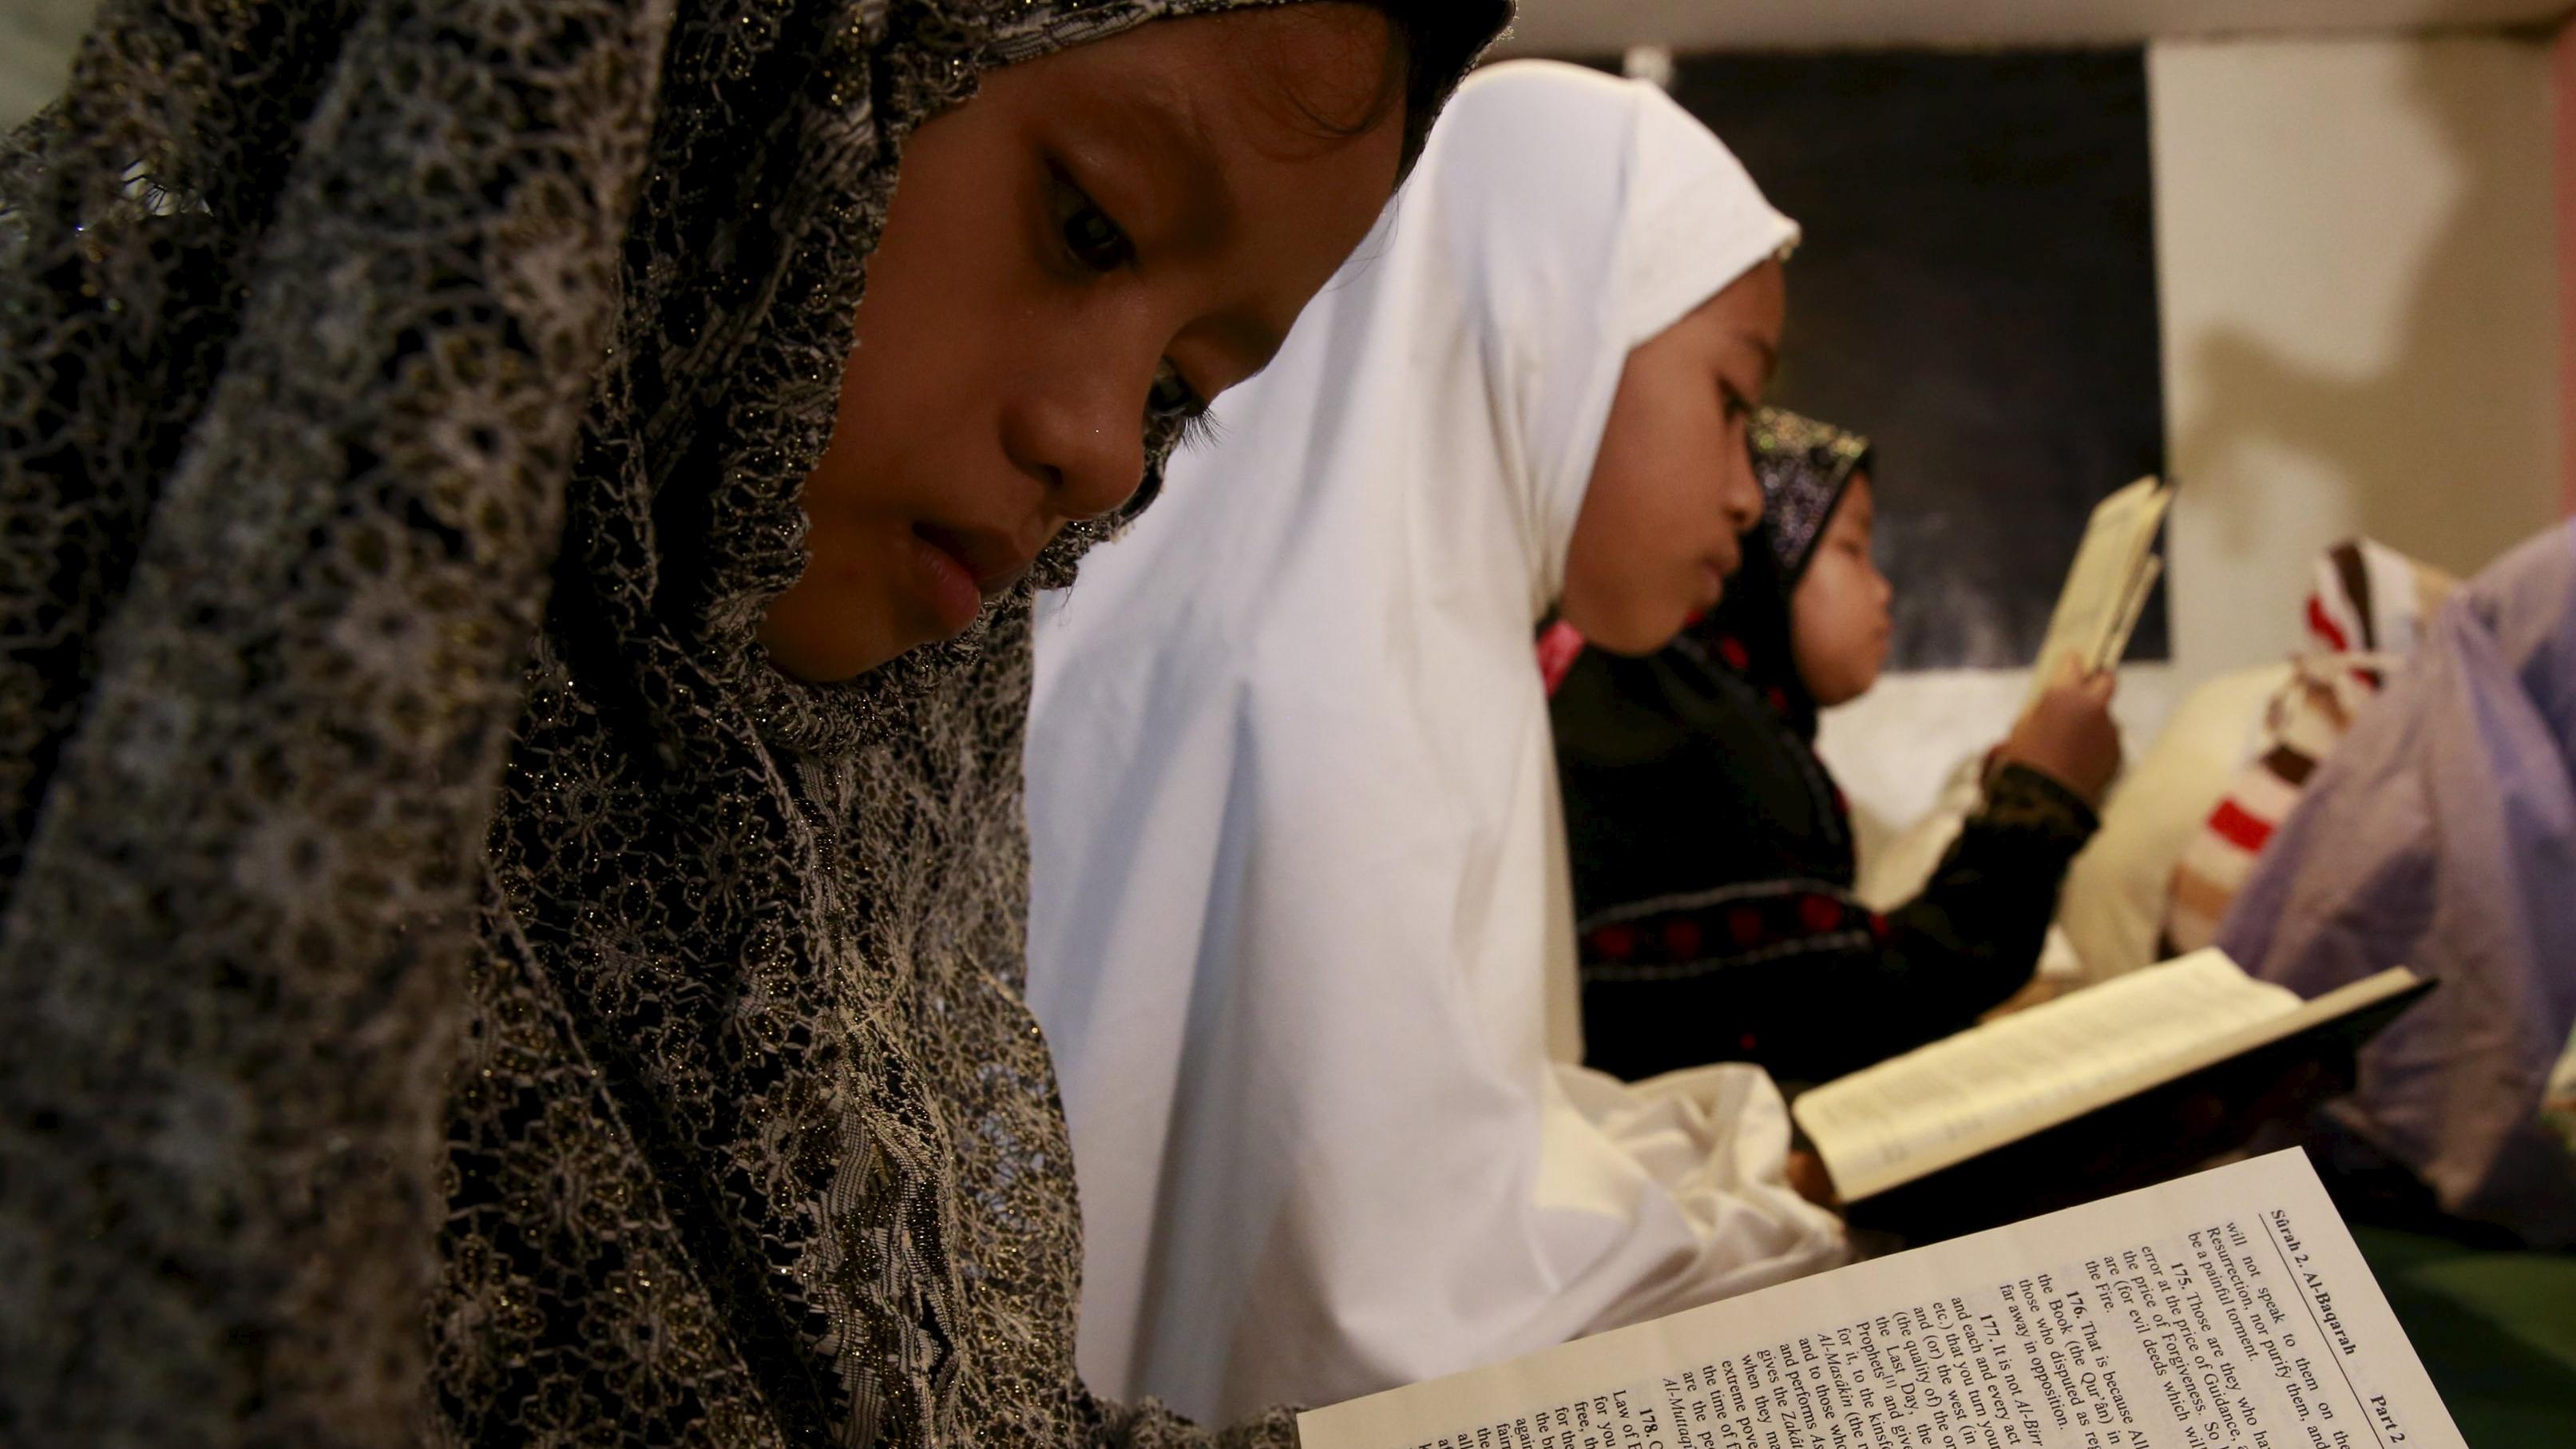 Muslim children read the Quran as they study inside a mosque at a slum area in Baseco, Tondo, metro Manila July 10, 2015.